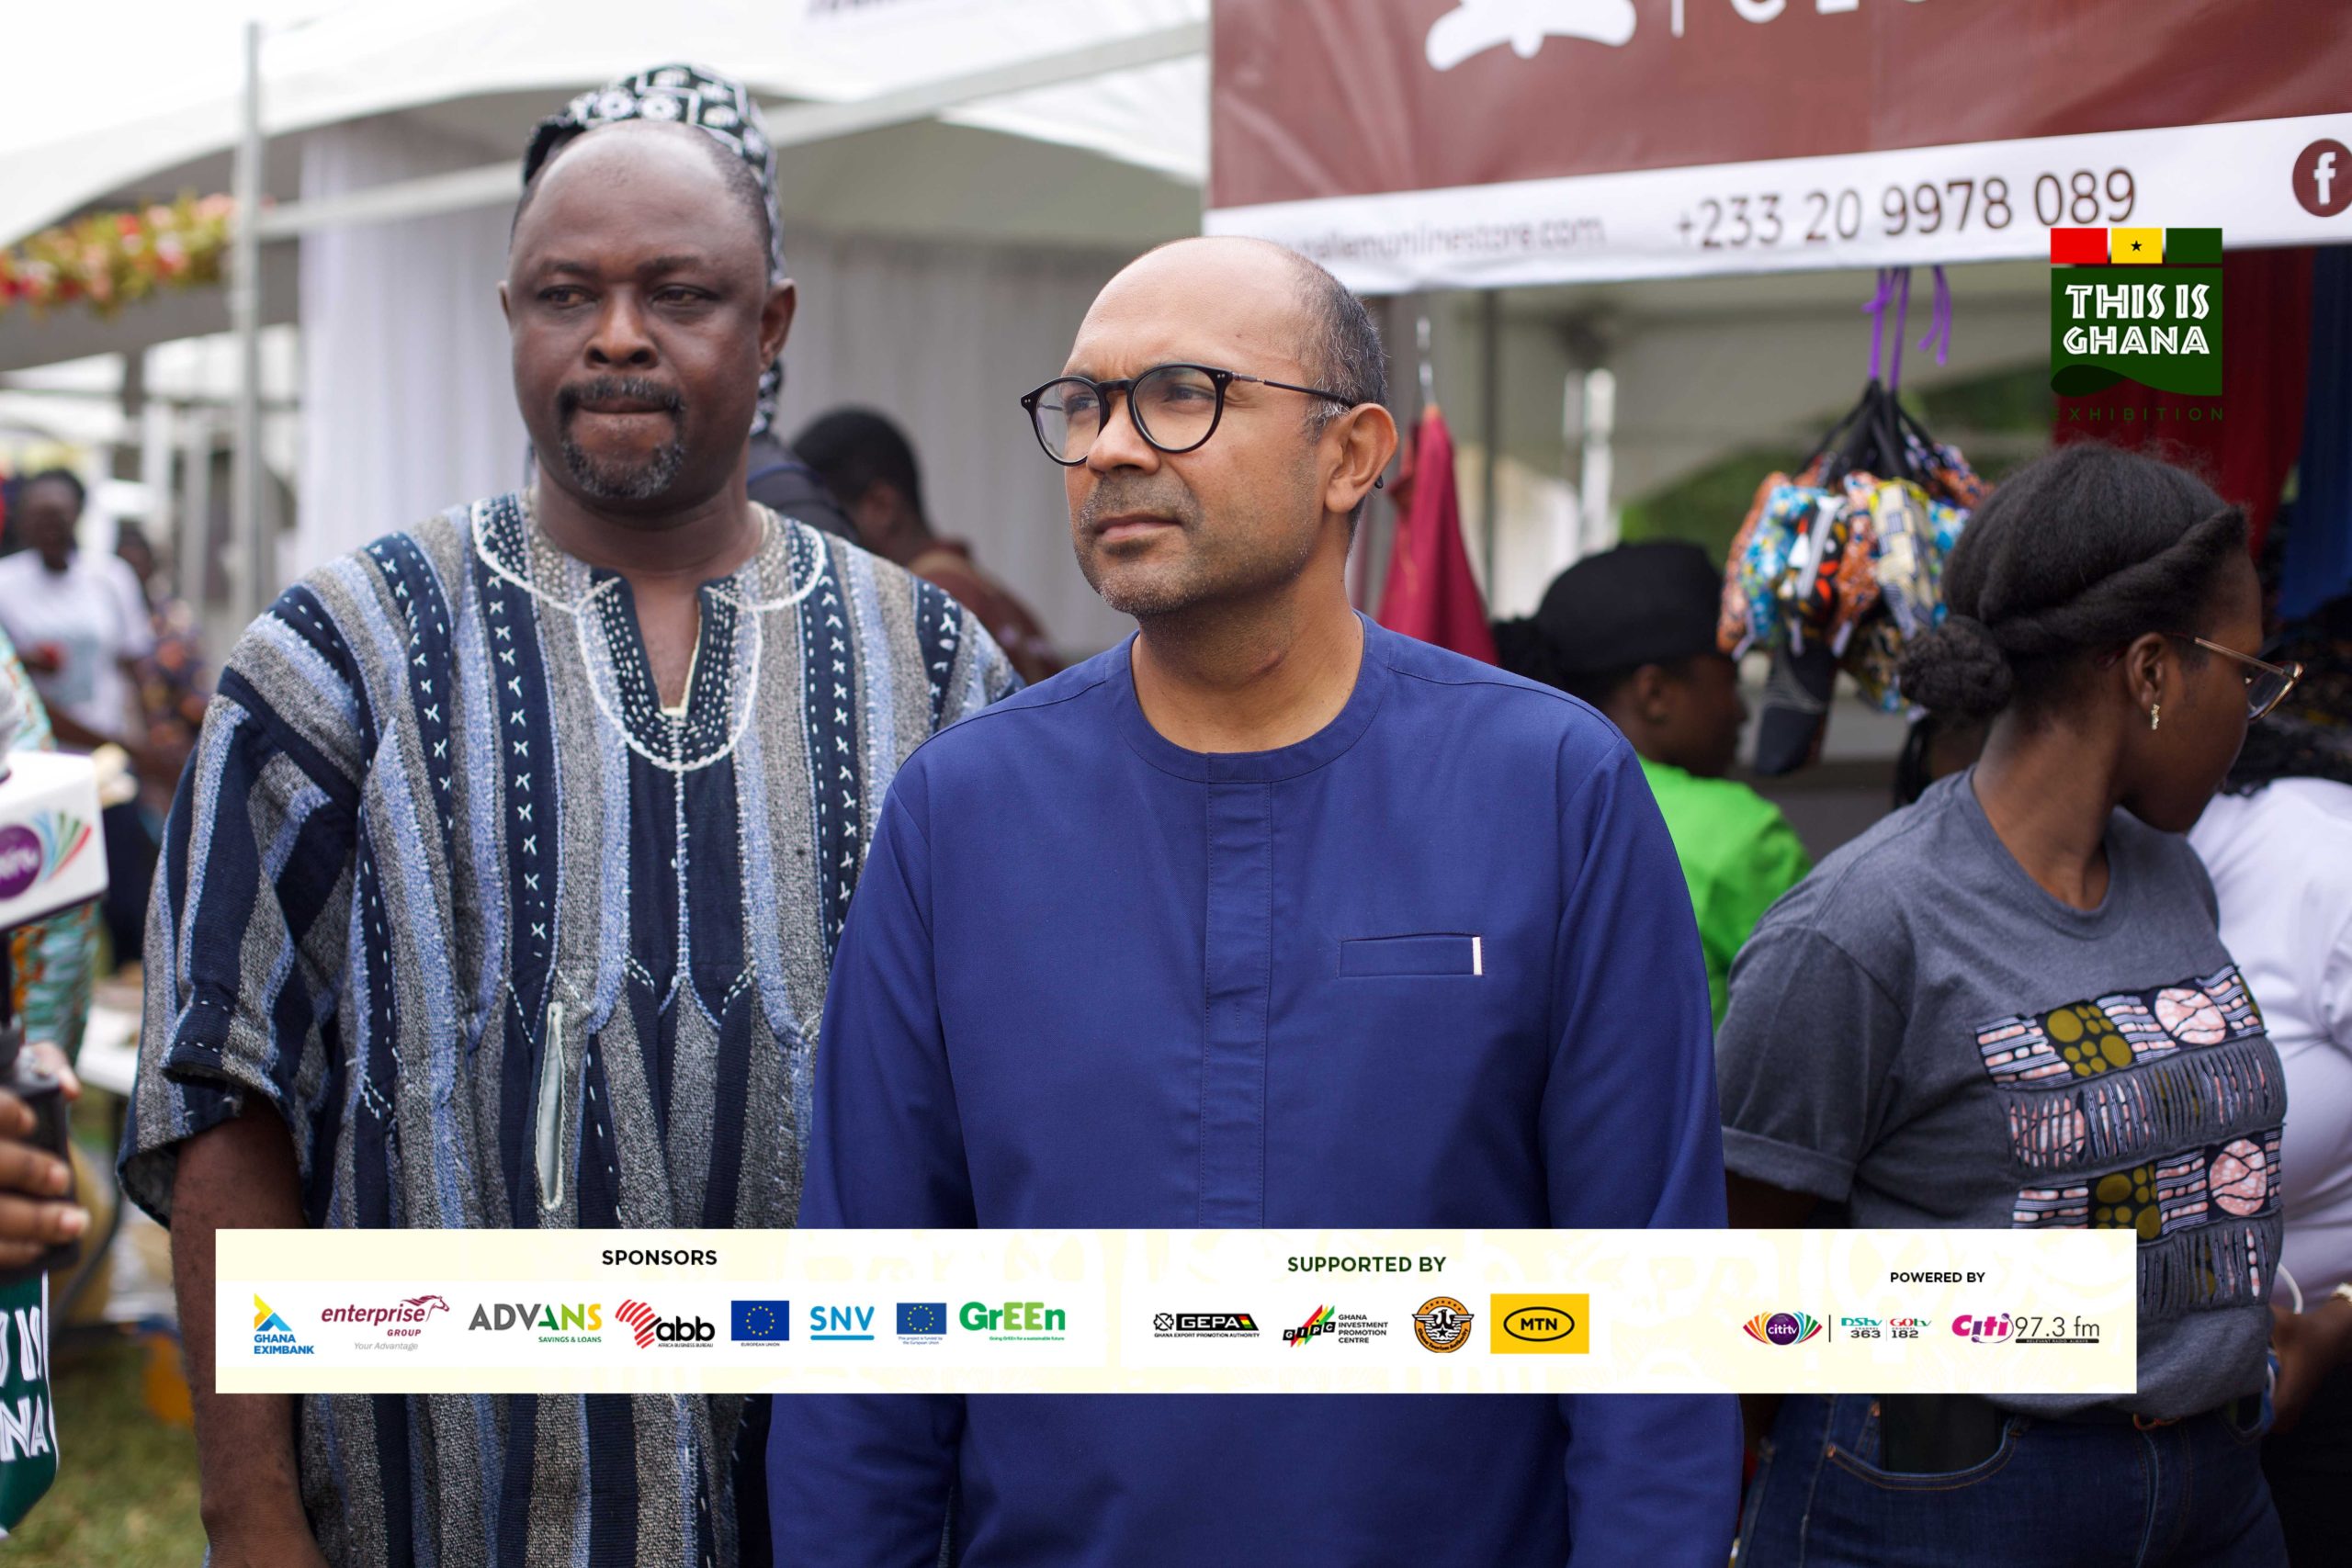 Day 1 of ‘This is Ghana Exhibition’ ends; exhibitors & patrons well satisfied [Photos]